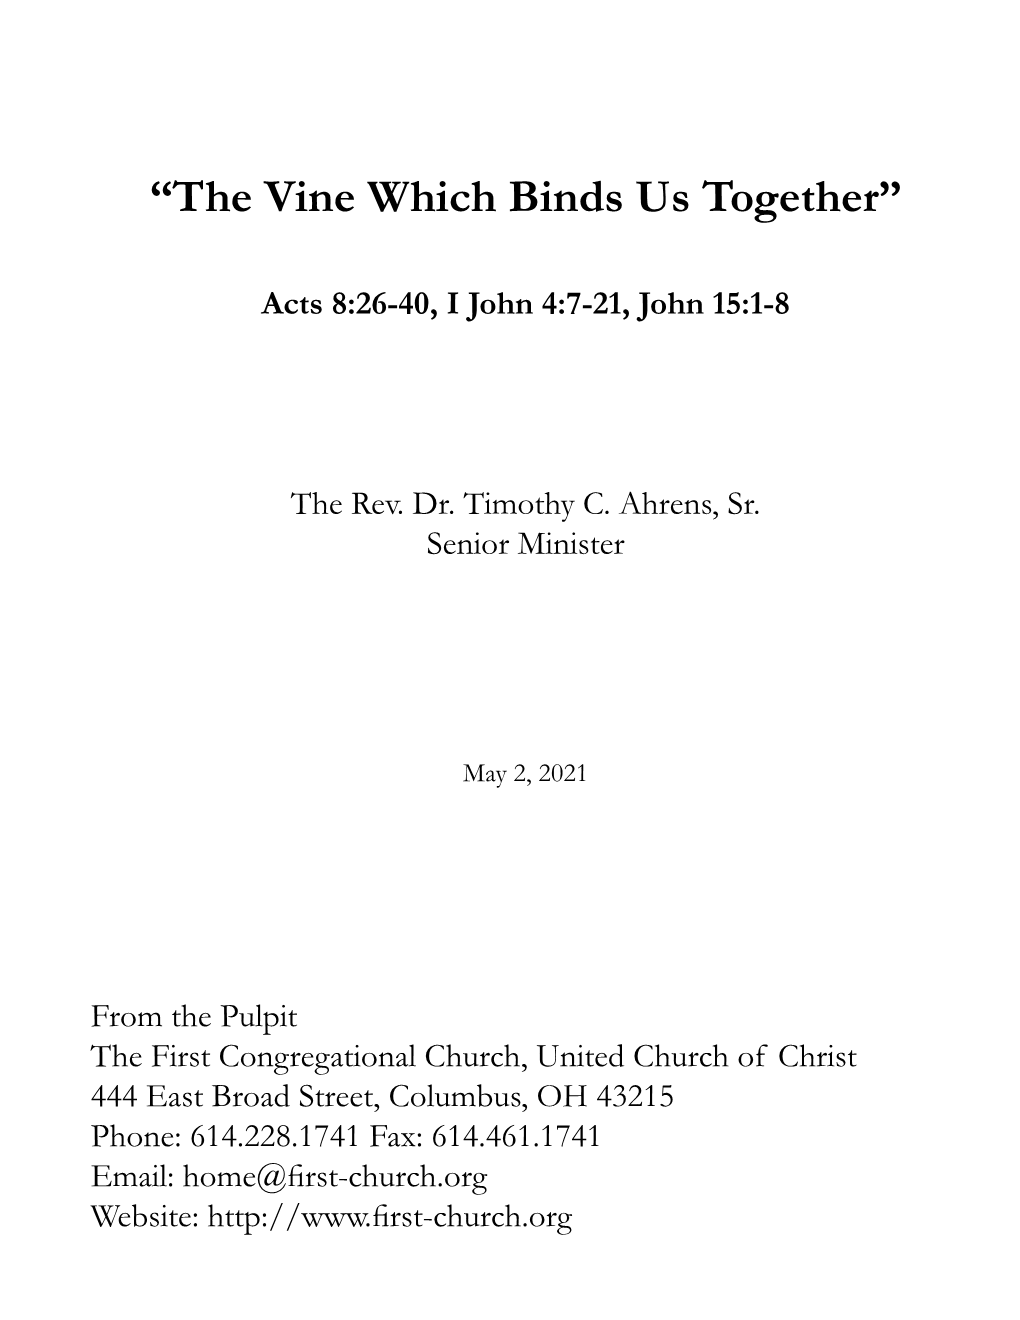 “The Vine Which Binds Us Together”